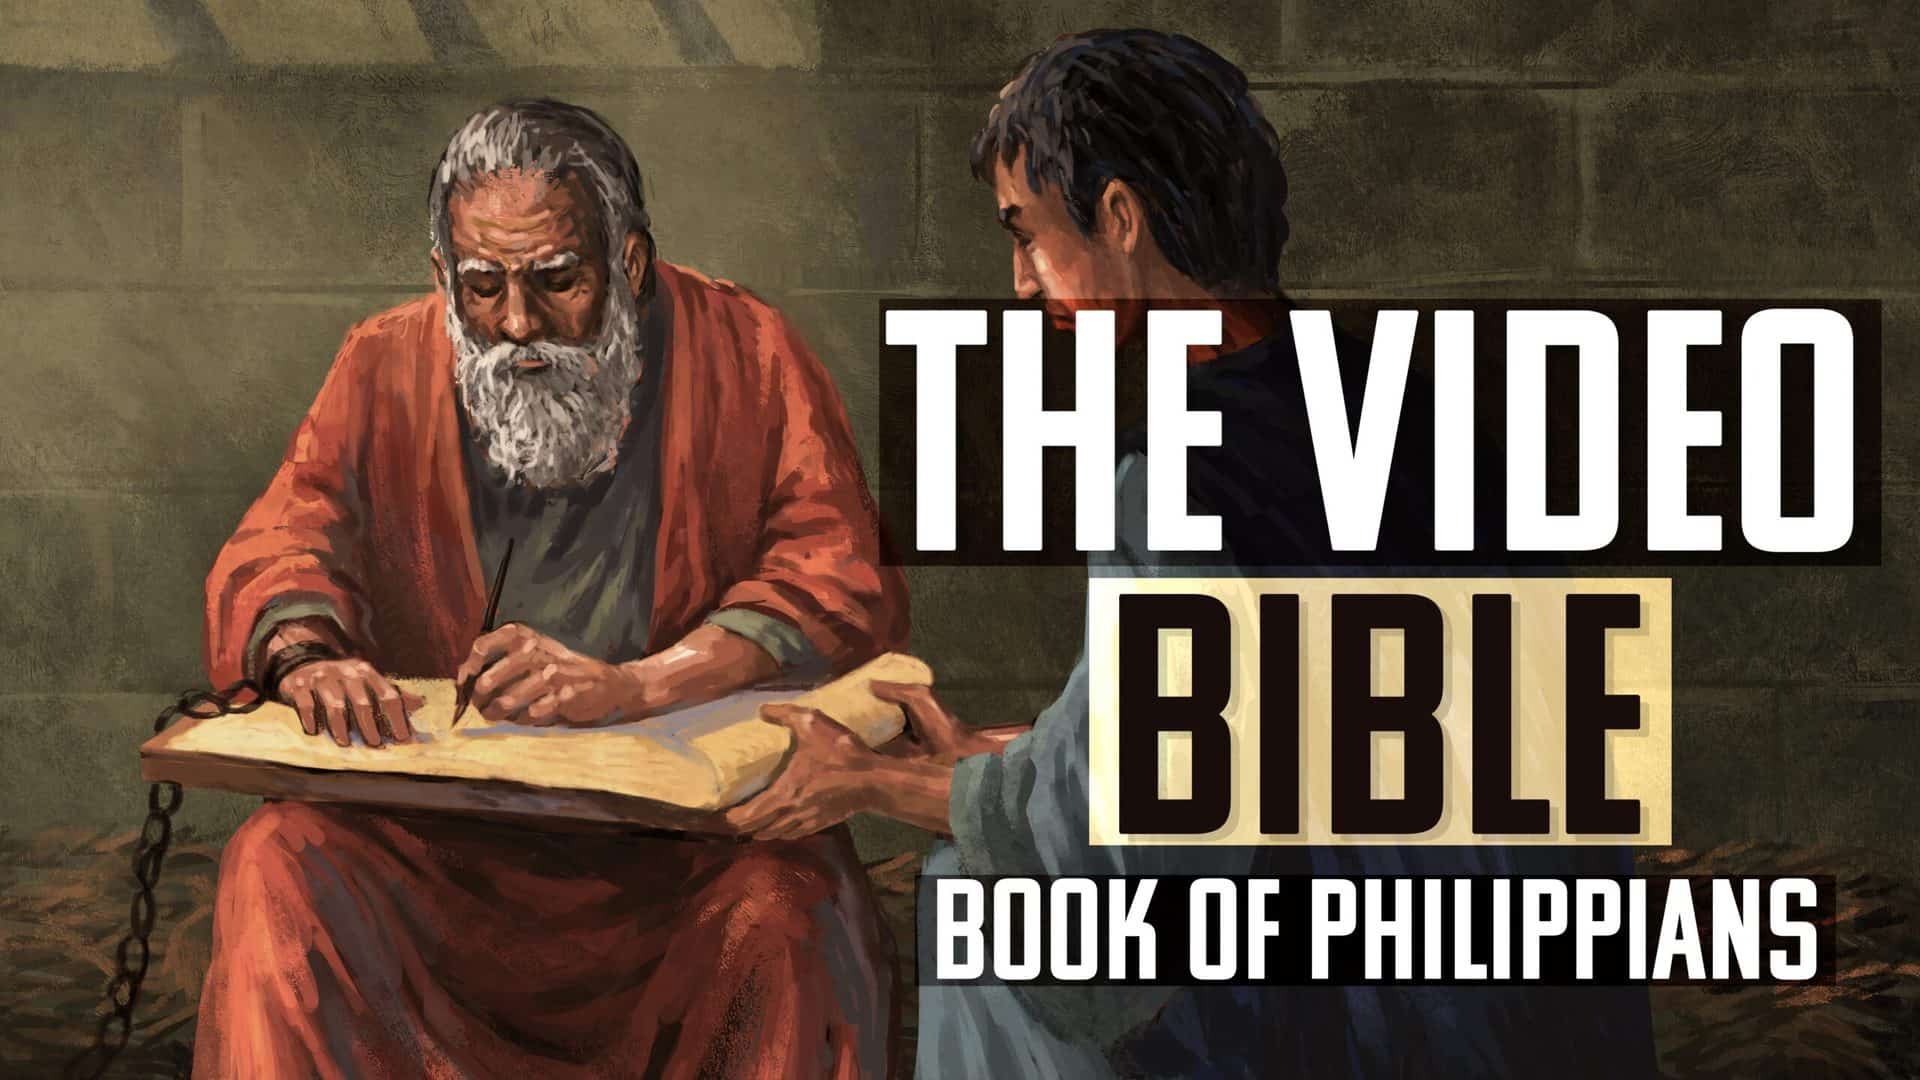 Cover image for the book of Philippians